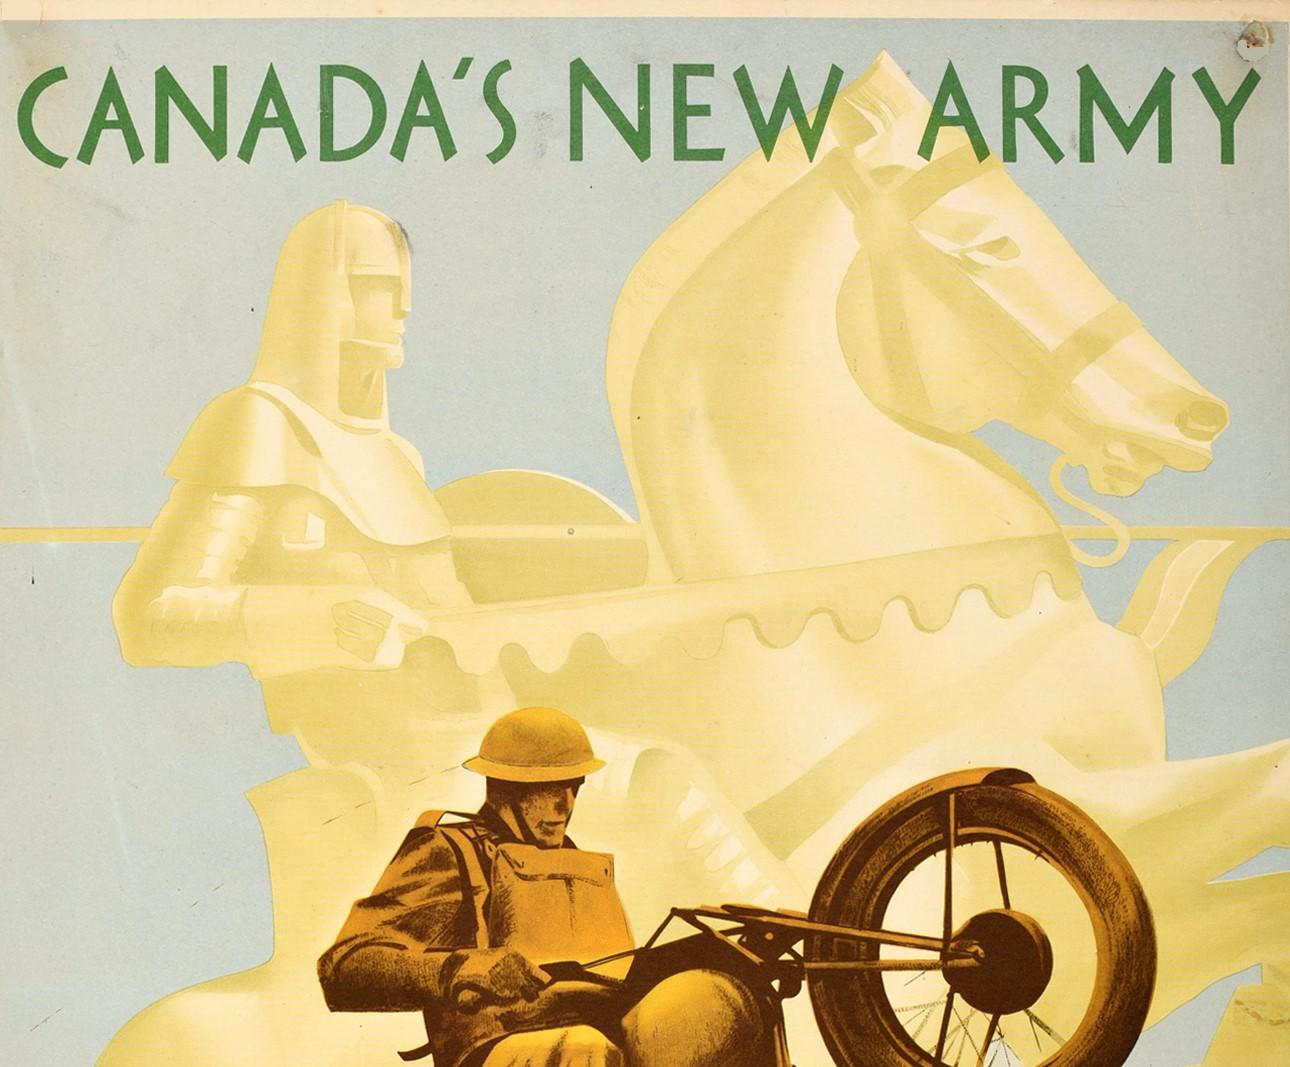 Original vintage military recruitment propaganda poster - Canada's New Army Needs Men Like You issued for the Department of National Defence by the Director of Public Information. Striking Art Deco style artwork by Eric Aldwinckle (1909-1980)